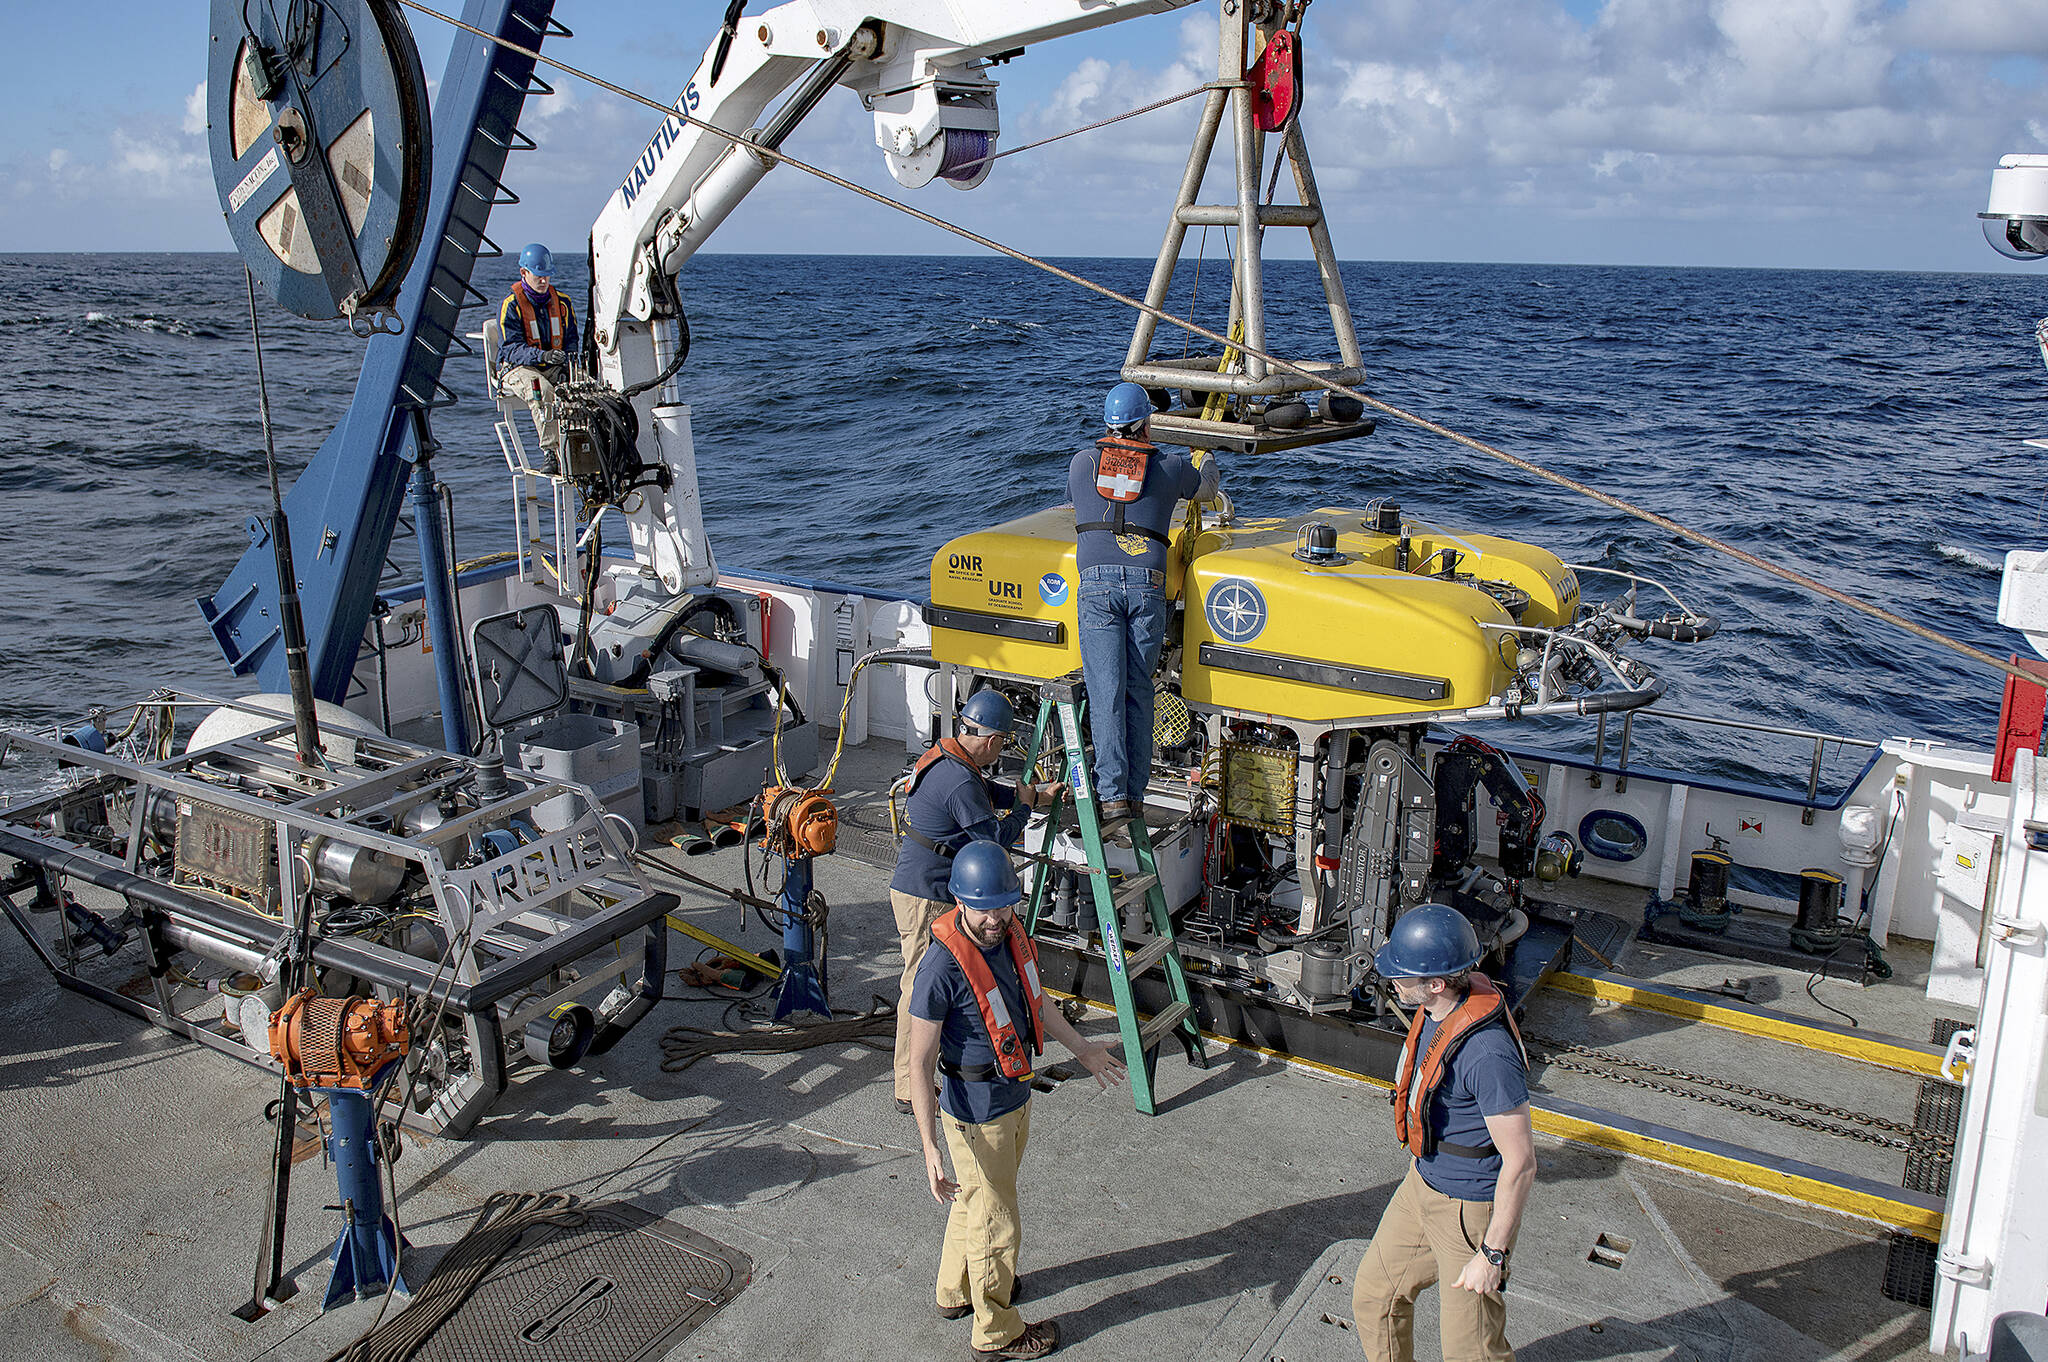 Staff aboard the Nautilus exploration ship prepare to place a remote controlled vehicle into the ocean to search for meteorites that fell in March 2018 (Susan Poulton/Ocean Exploration Trust).